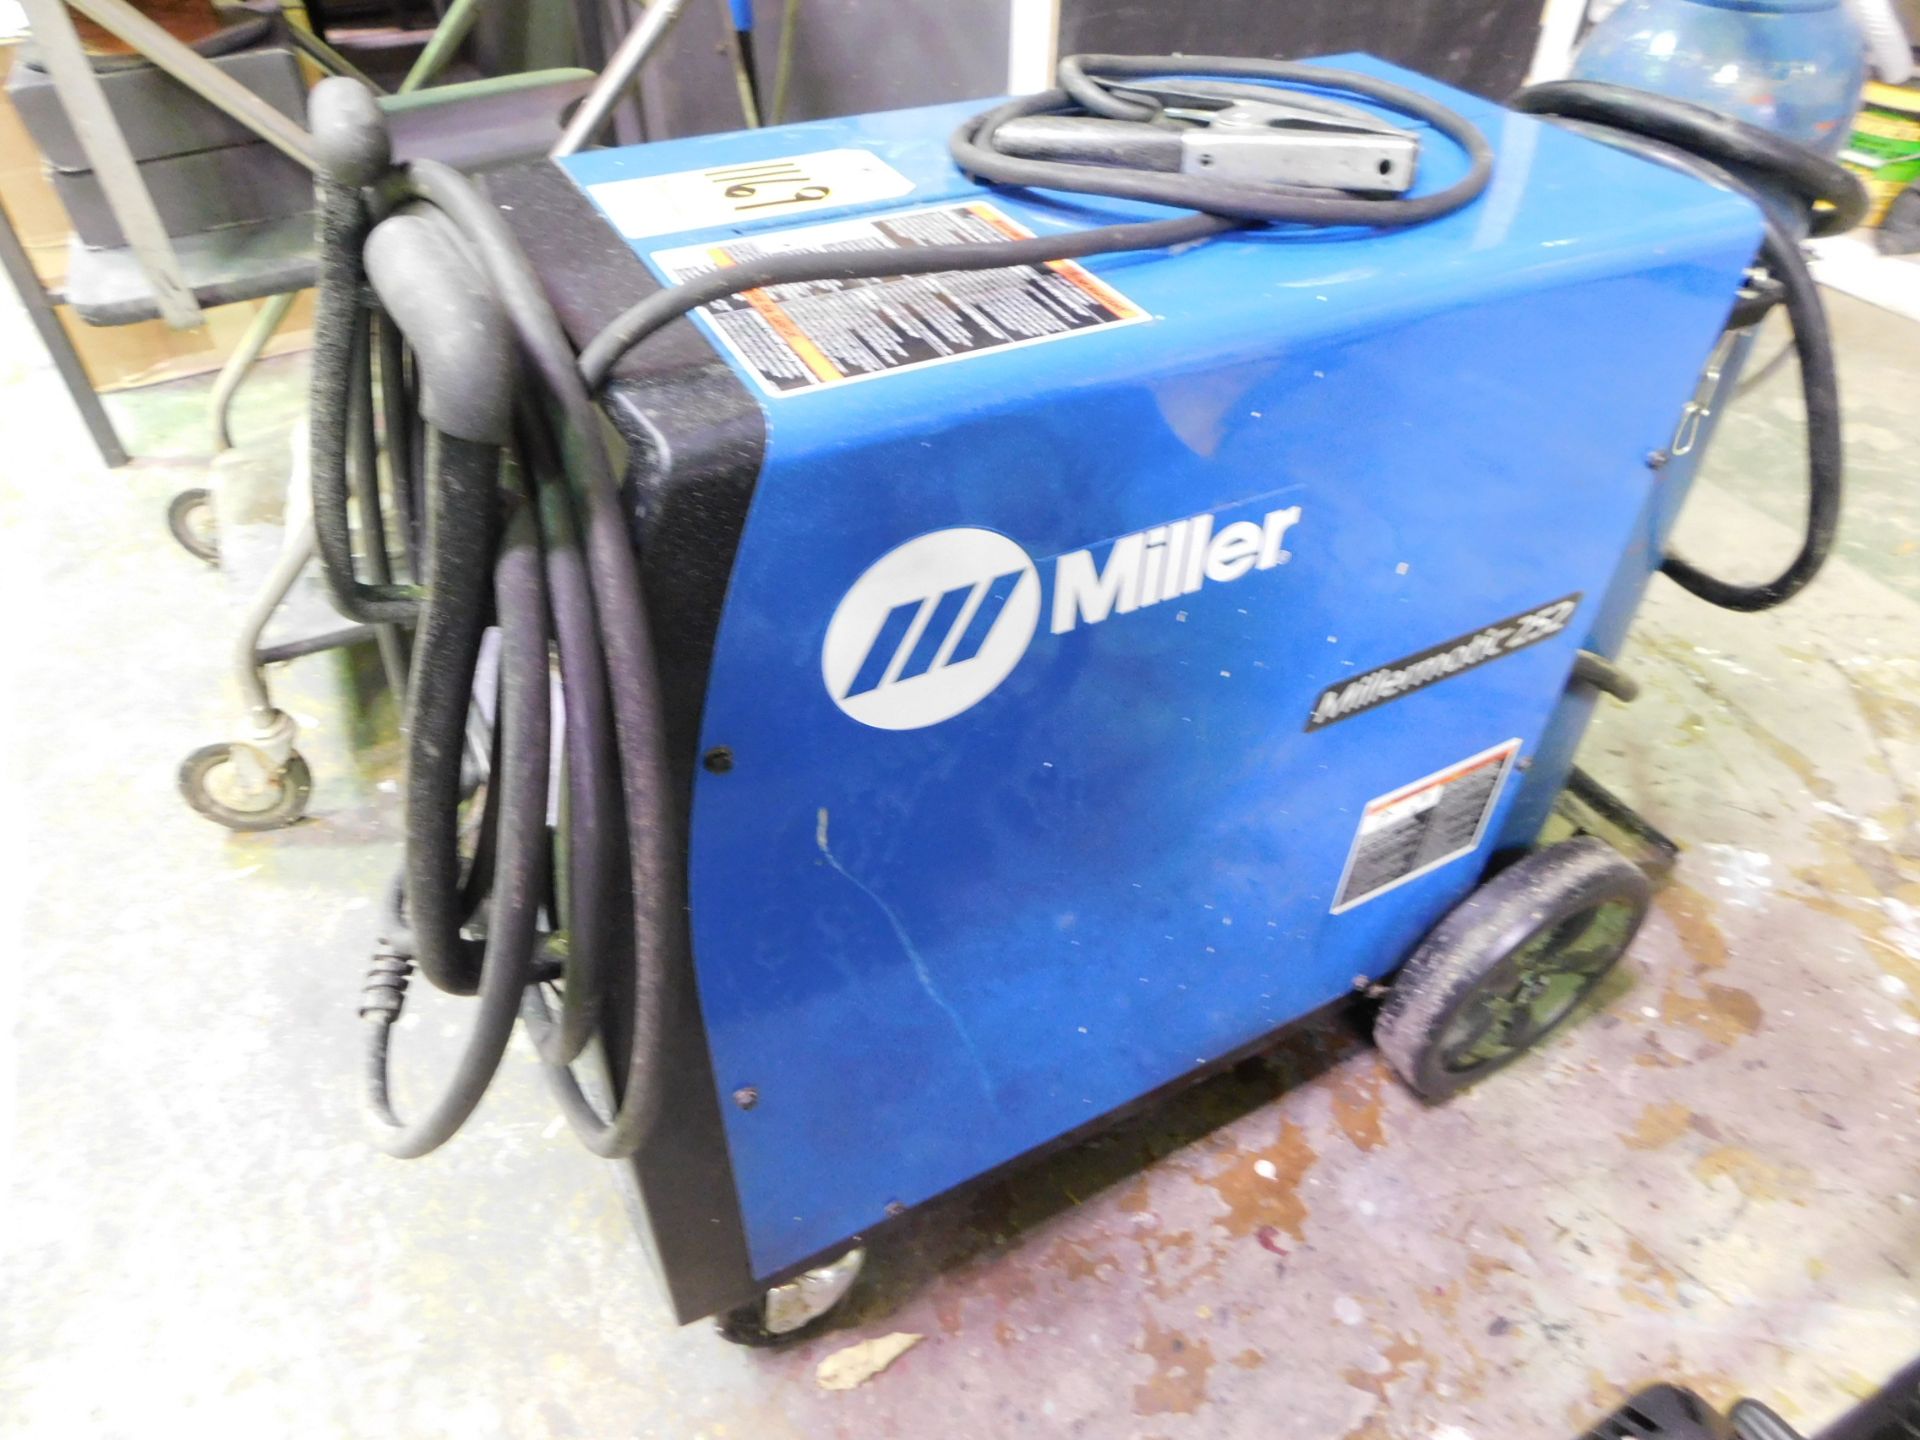 Miller Millermatic 252 Mig Welder SN MH030546N, with Mig Gun, (NOTE: Tank does not go with welder) - Image 3 of 4